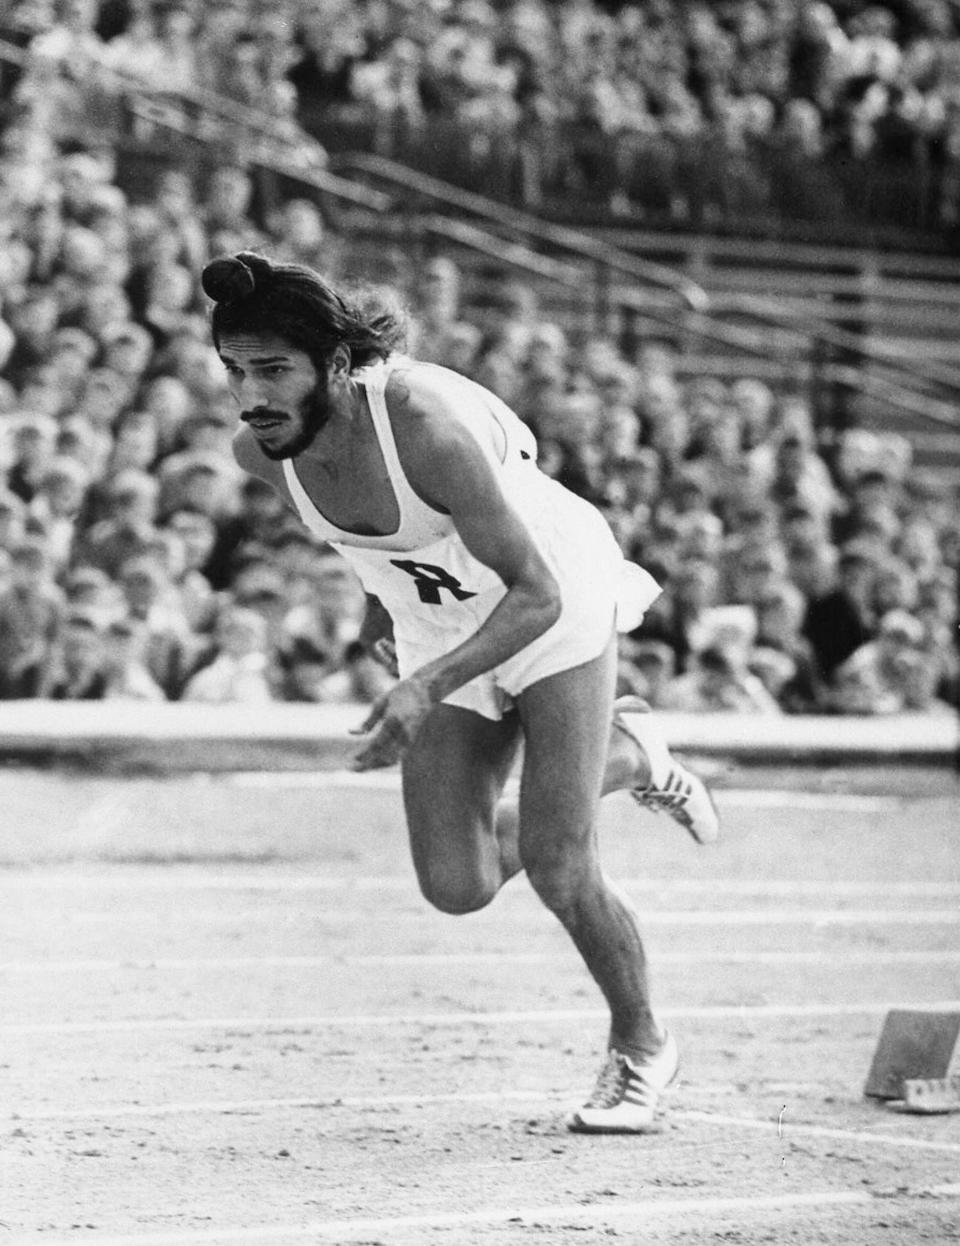 FILE - In this June 20, 1961, file photo, Milkha Singh, the famed Indian middle-distance runner, starts the 400 metres race in the Janusz Kusocinski Memorial Track and Field MeetinG, in Warsaw, Poland. Singh, one of India’s first sport superstars and ace sprinter who overcame a childhood tragedy to become the country's most celebrated athlete, has died. He was 91. Singh's family said he died late Friday, June 18, 2021, of complications from COVID-19 in a hospital in the northern city of Chandigarh. (AP Photo/File)